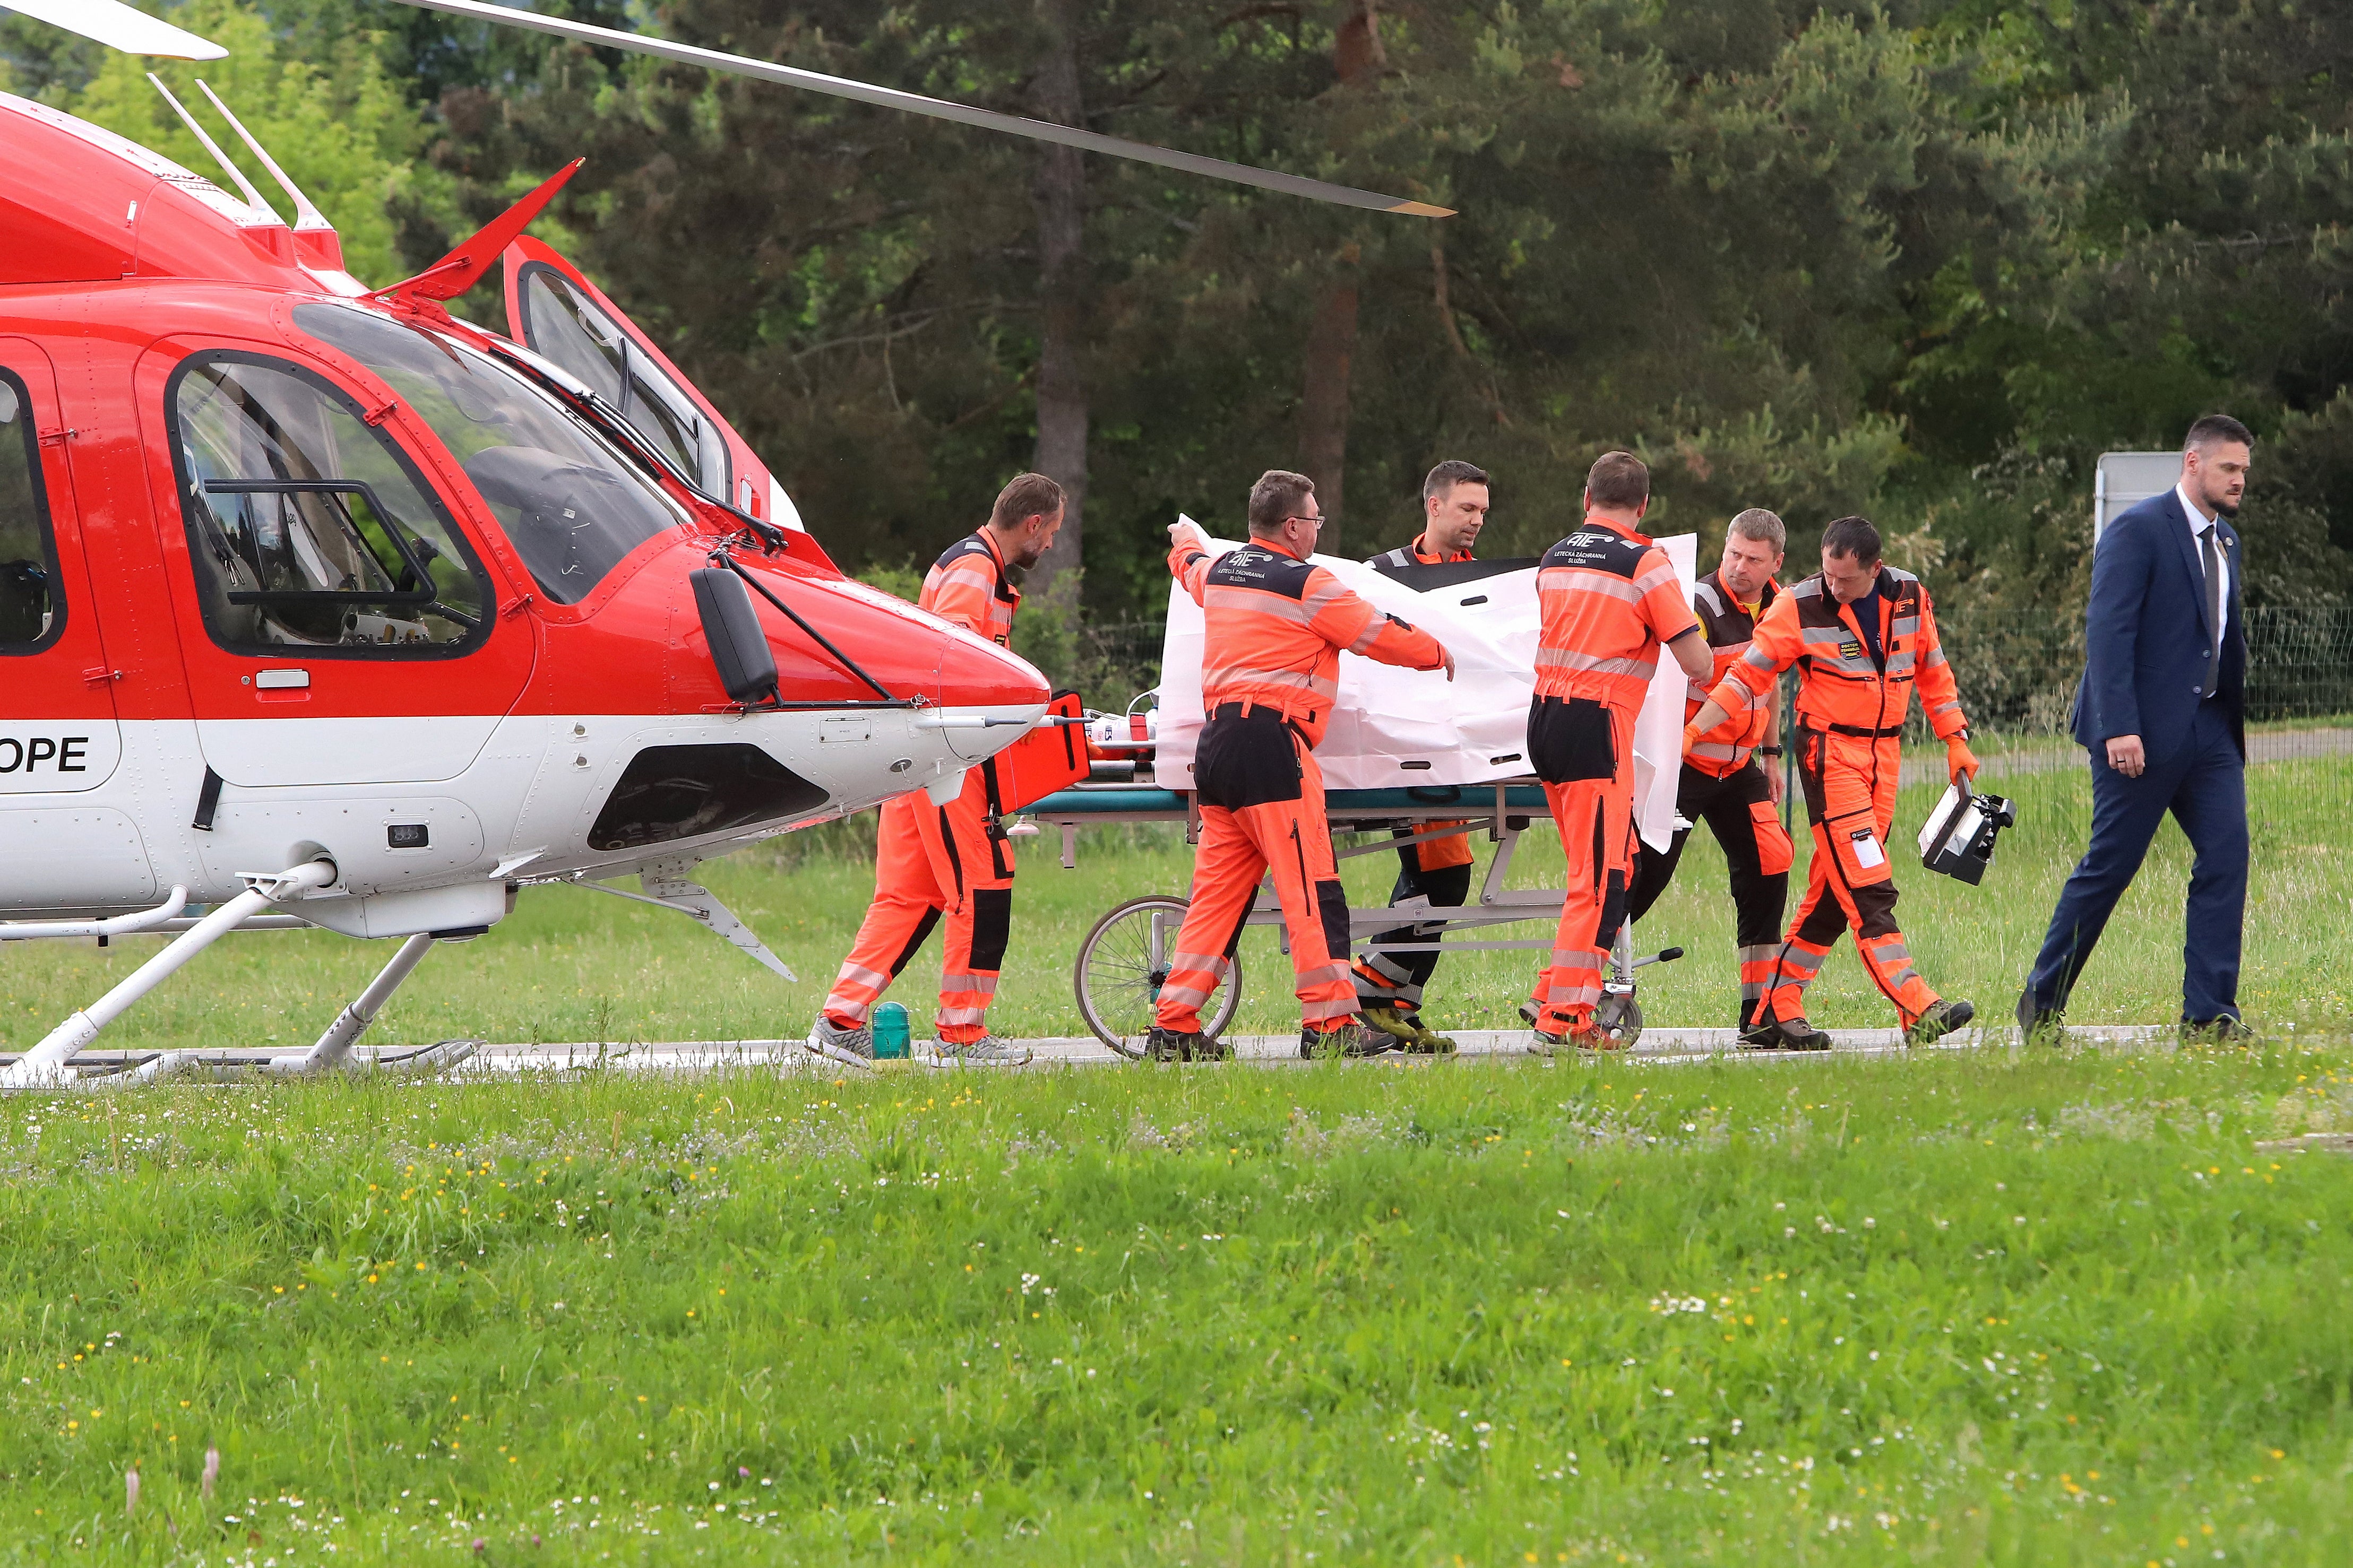 Mr Fico is seen being transported from a helicopter by medics and his security detail to the hospital in Banska Bystrica